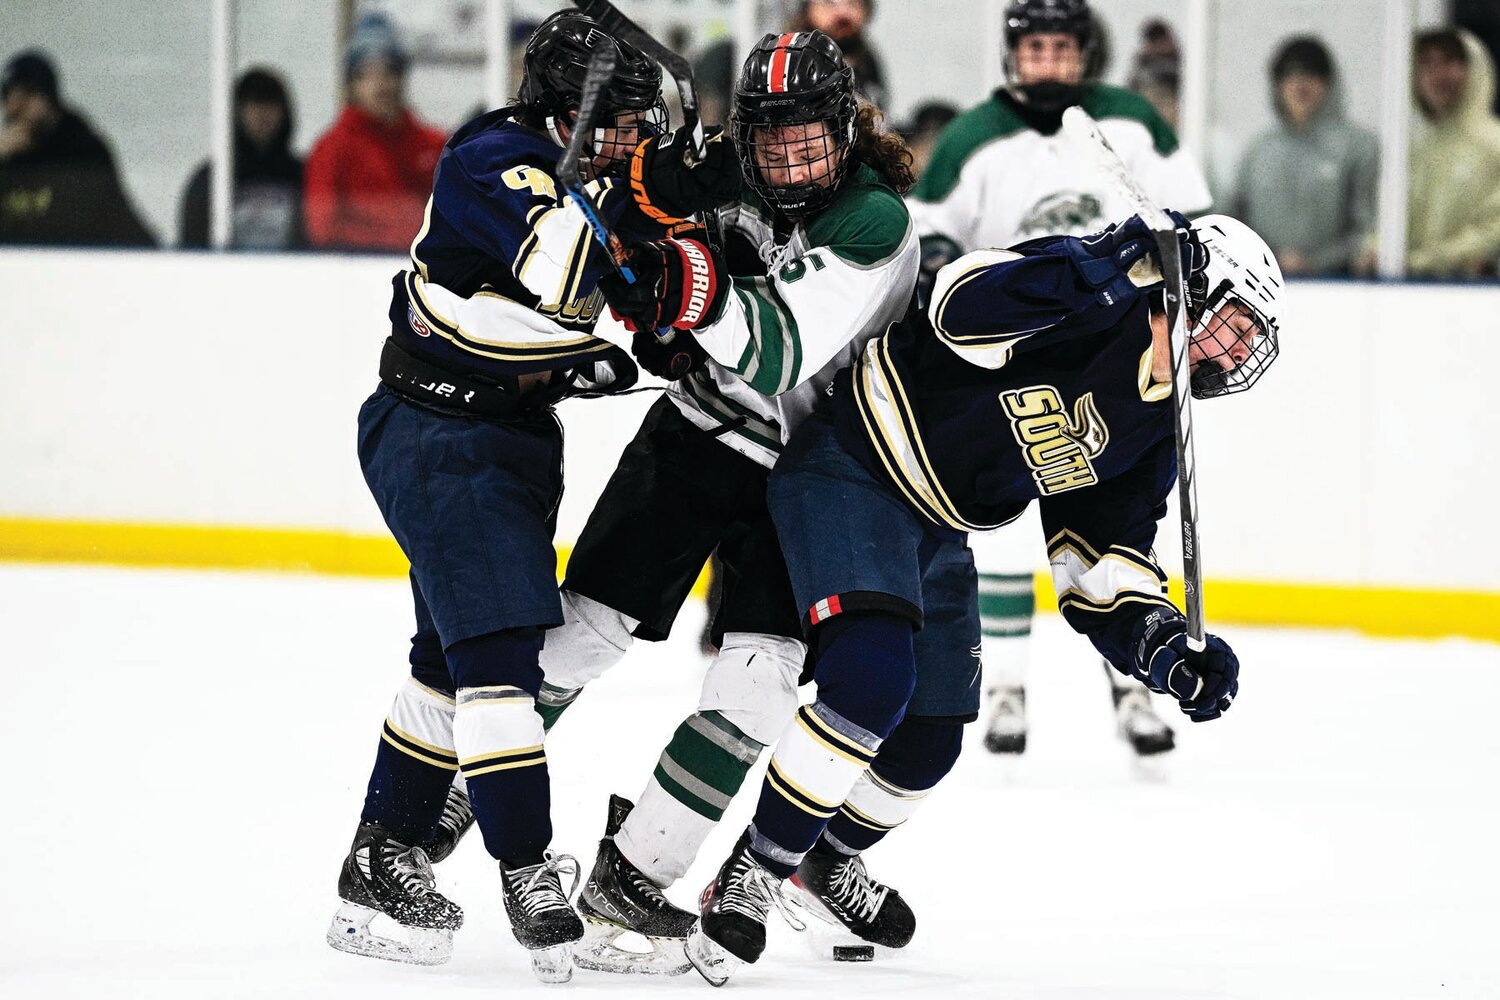 Pennridge’s James Rush tries to split the squeeze from Council Rock South’s Jake Weiner and James DiIulio in the third period.